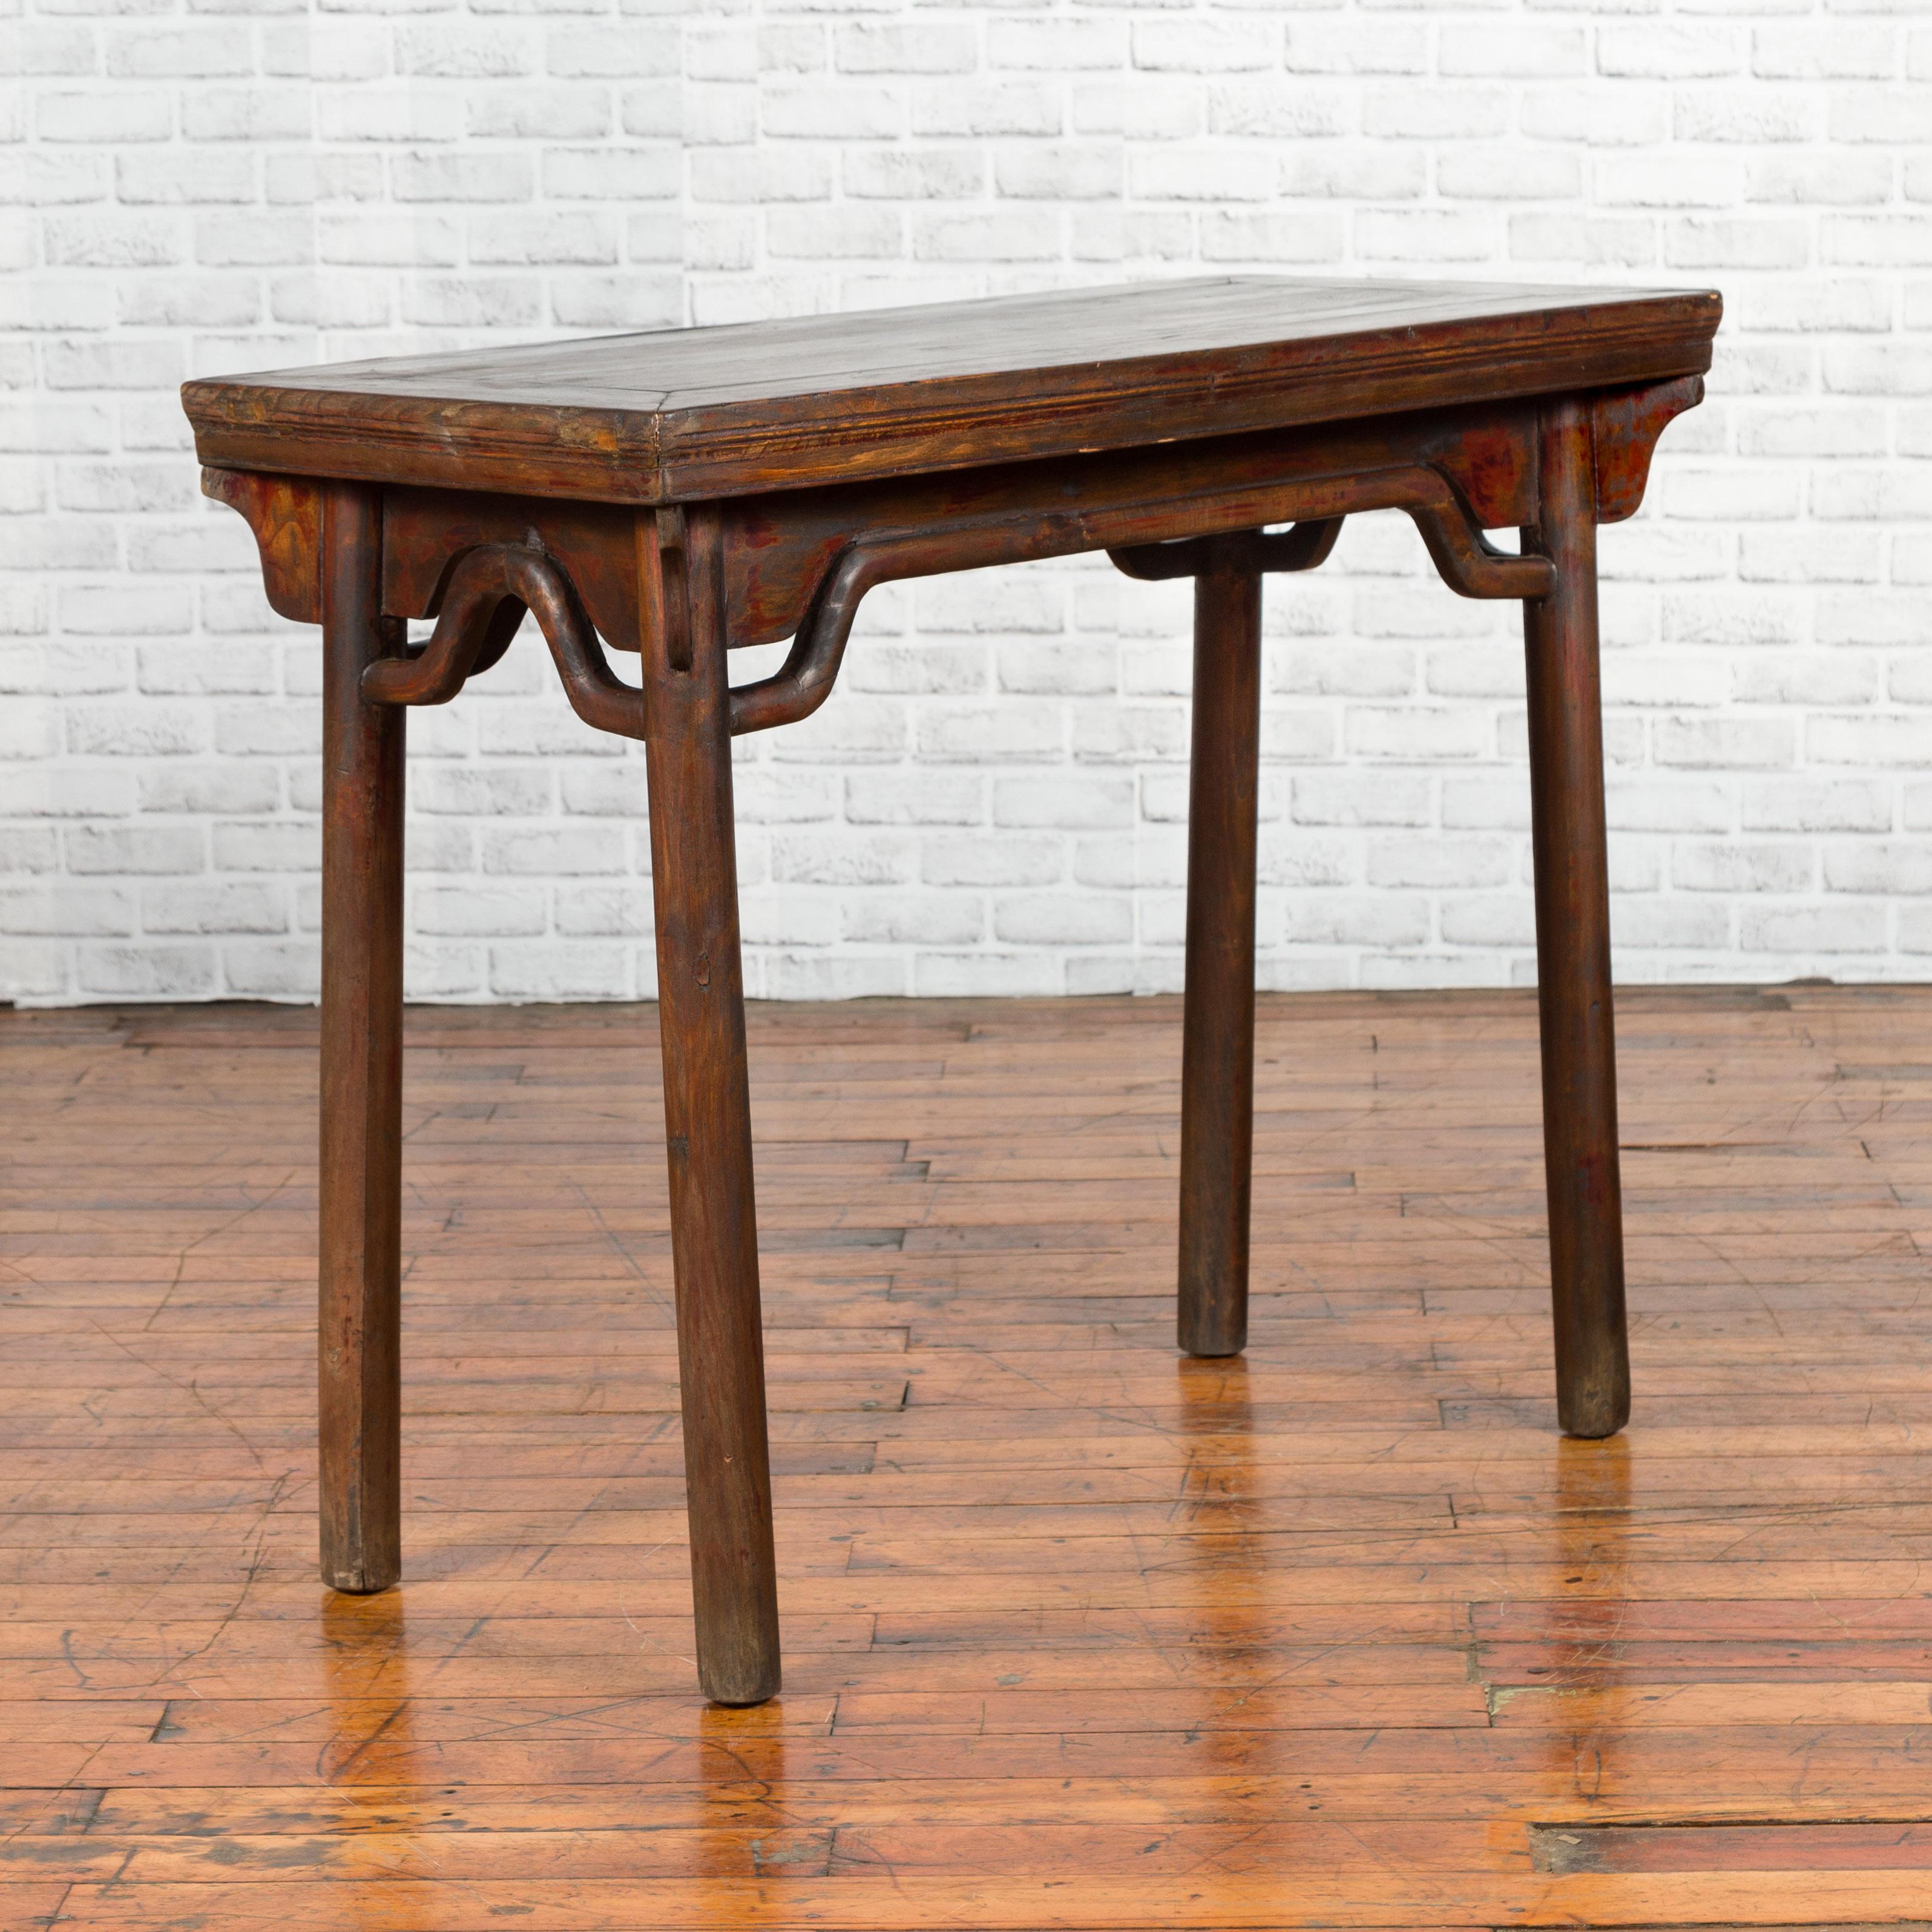 A Chinese Qing Dynasty elmwood wine table from the 19th century, with humpbacked apron and carved spandrels. Created in China during the 19th century, this elm wine table features a rectangular top with central board, sitting above a humpbacked